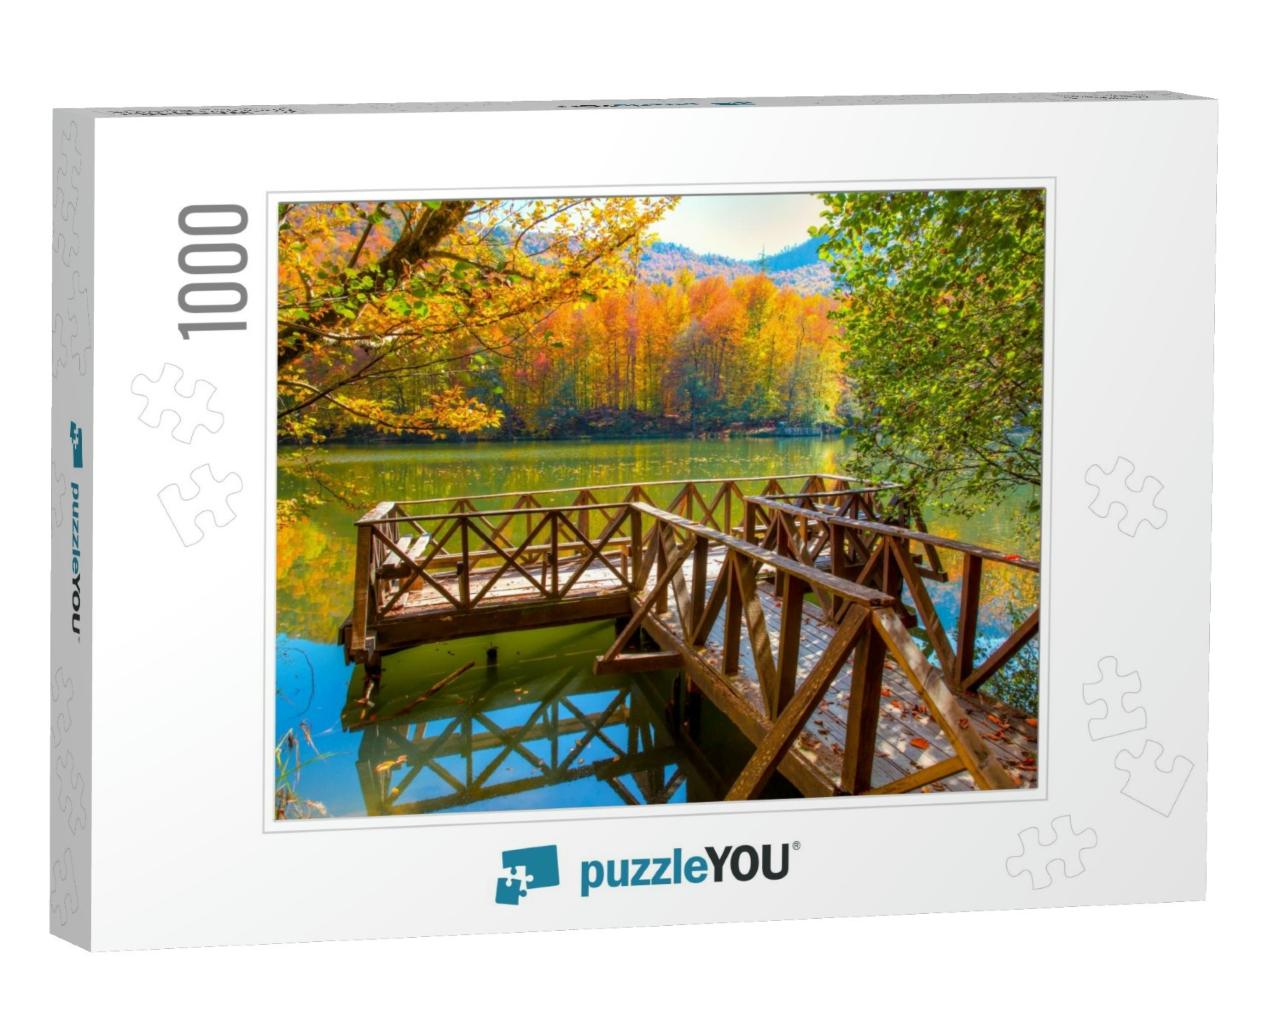 Autumn Landscape in Seven Lakes Yedigoller Park Bolu, Tur... Jigsaw Puzzle with 1000 pieces